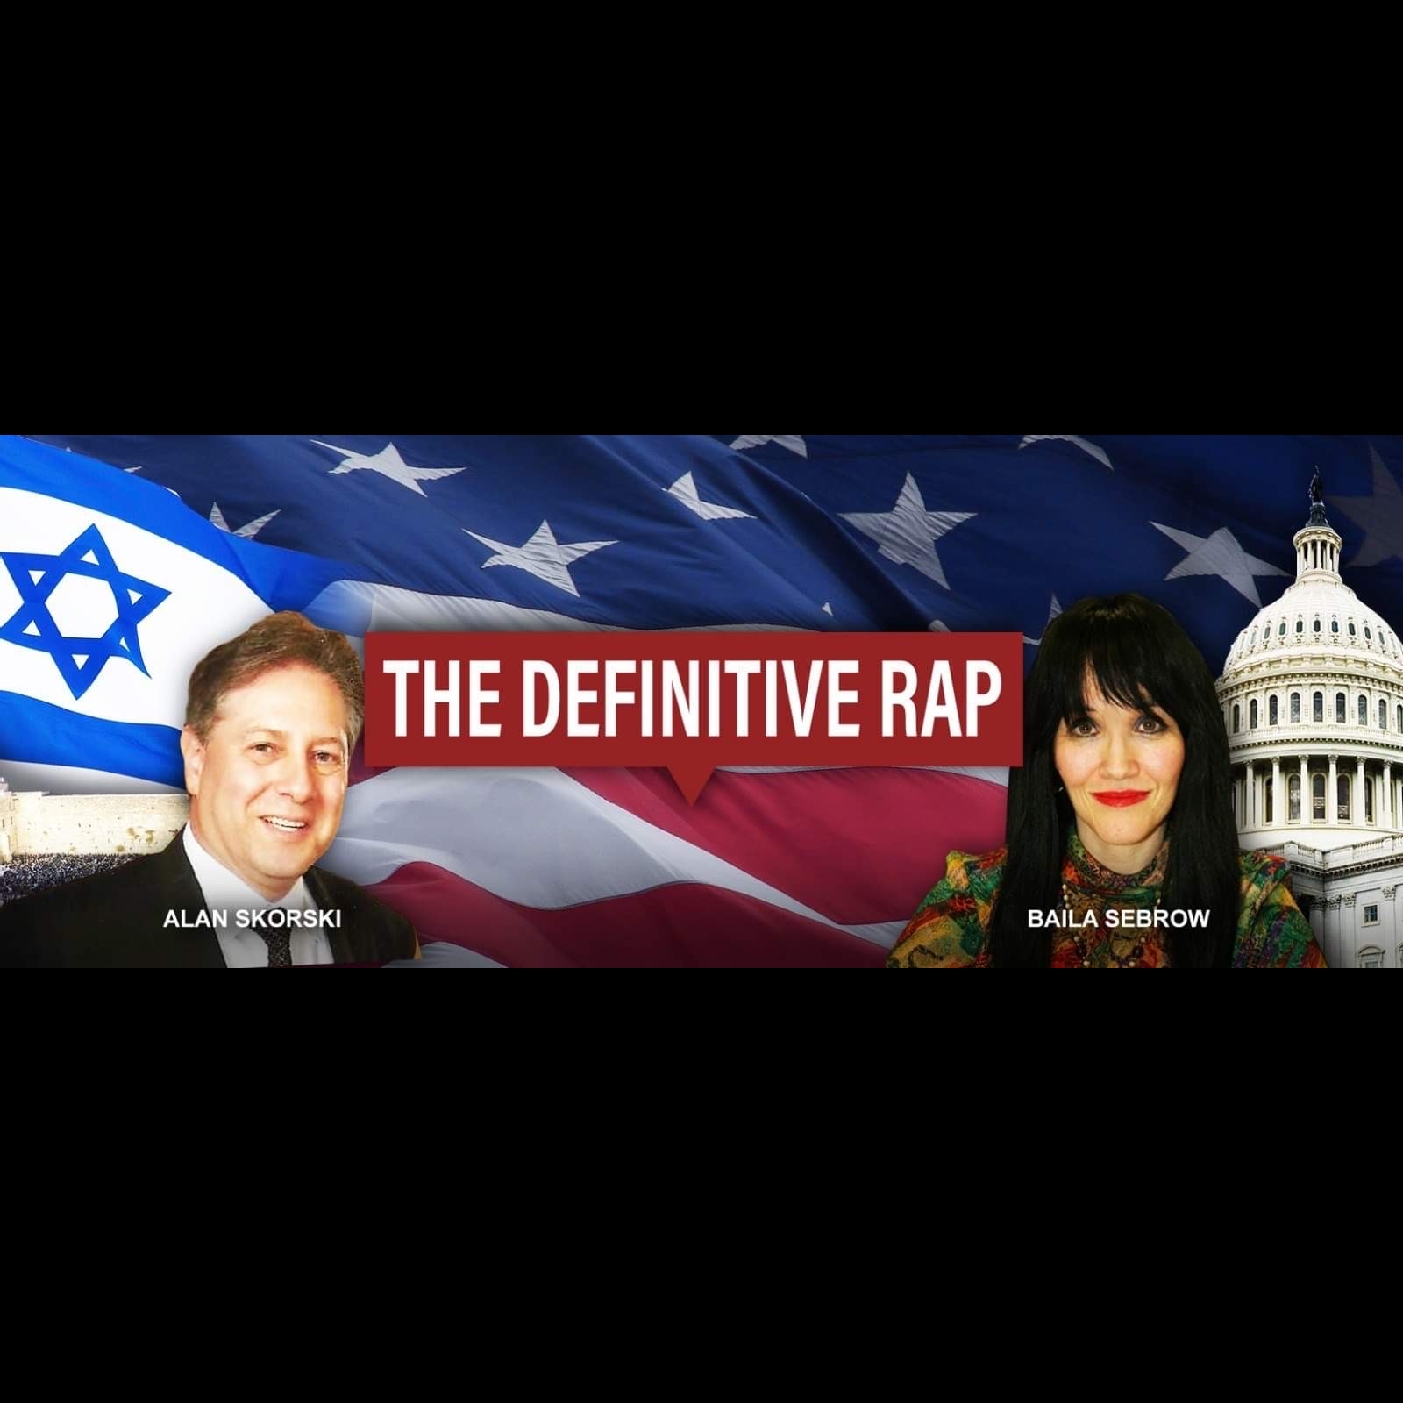 THE DEFINITIVE RAP: Interview with Dr. David Tenenbaum, author of Accused of Treason: